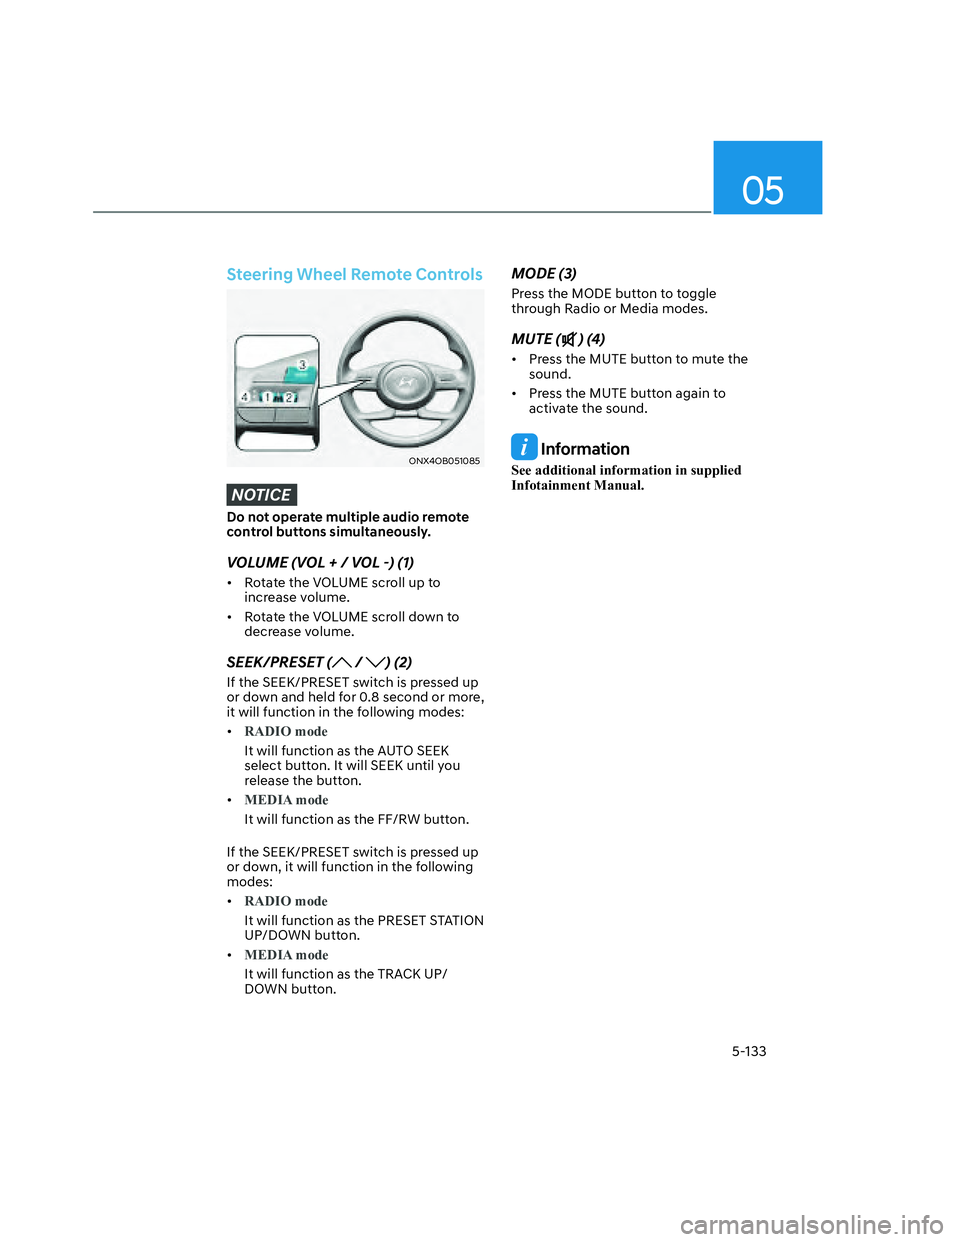 HYUNDAI SANTA CRUZ 2022  Owners Manual 05
5-133
Steering Wheel Remote Controls
ONX4OB051085ONX4OB051085
NOTICE
Do not operate multiple audio remote 
control buttons simultaneously.
VOLUME (VOL + / VOL -) (1)
•  Rotate the VOLUME scroll u